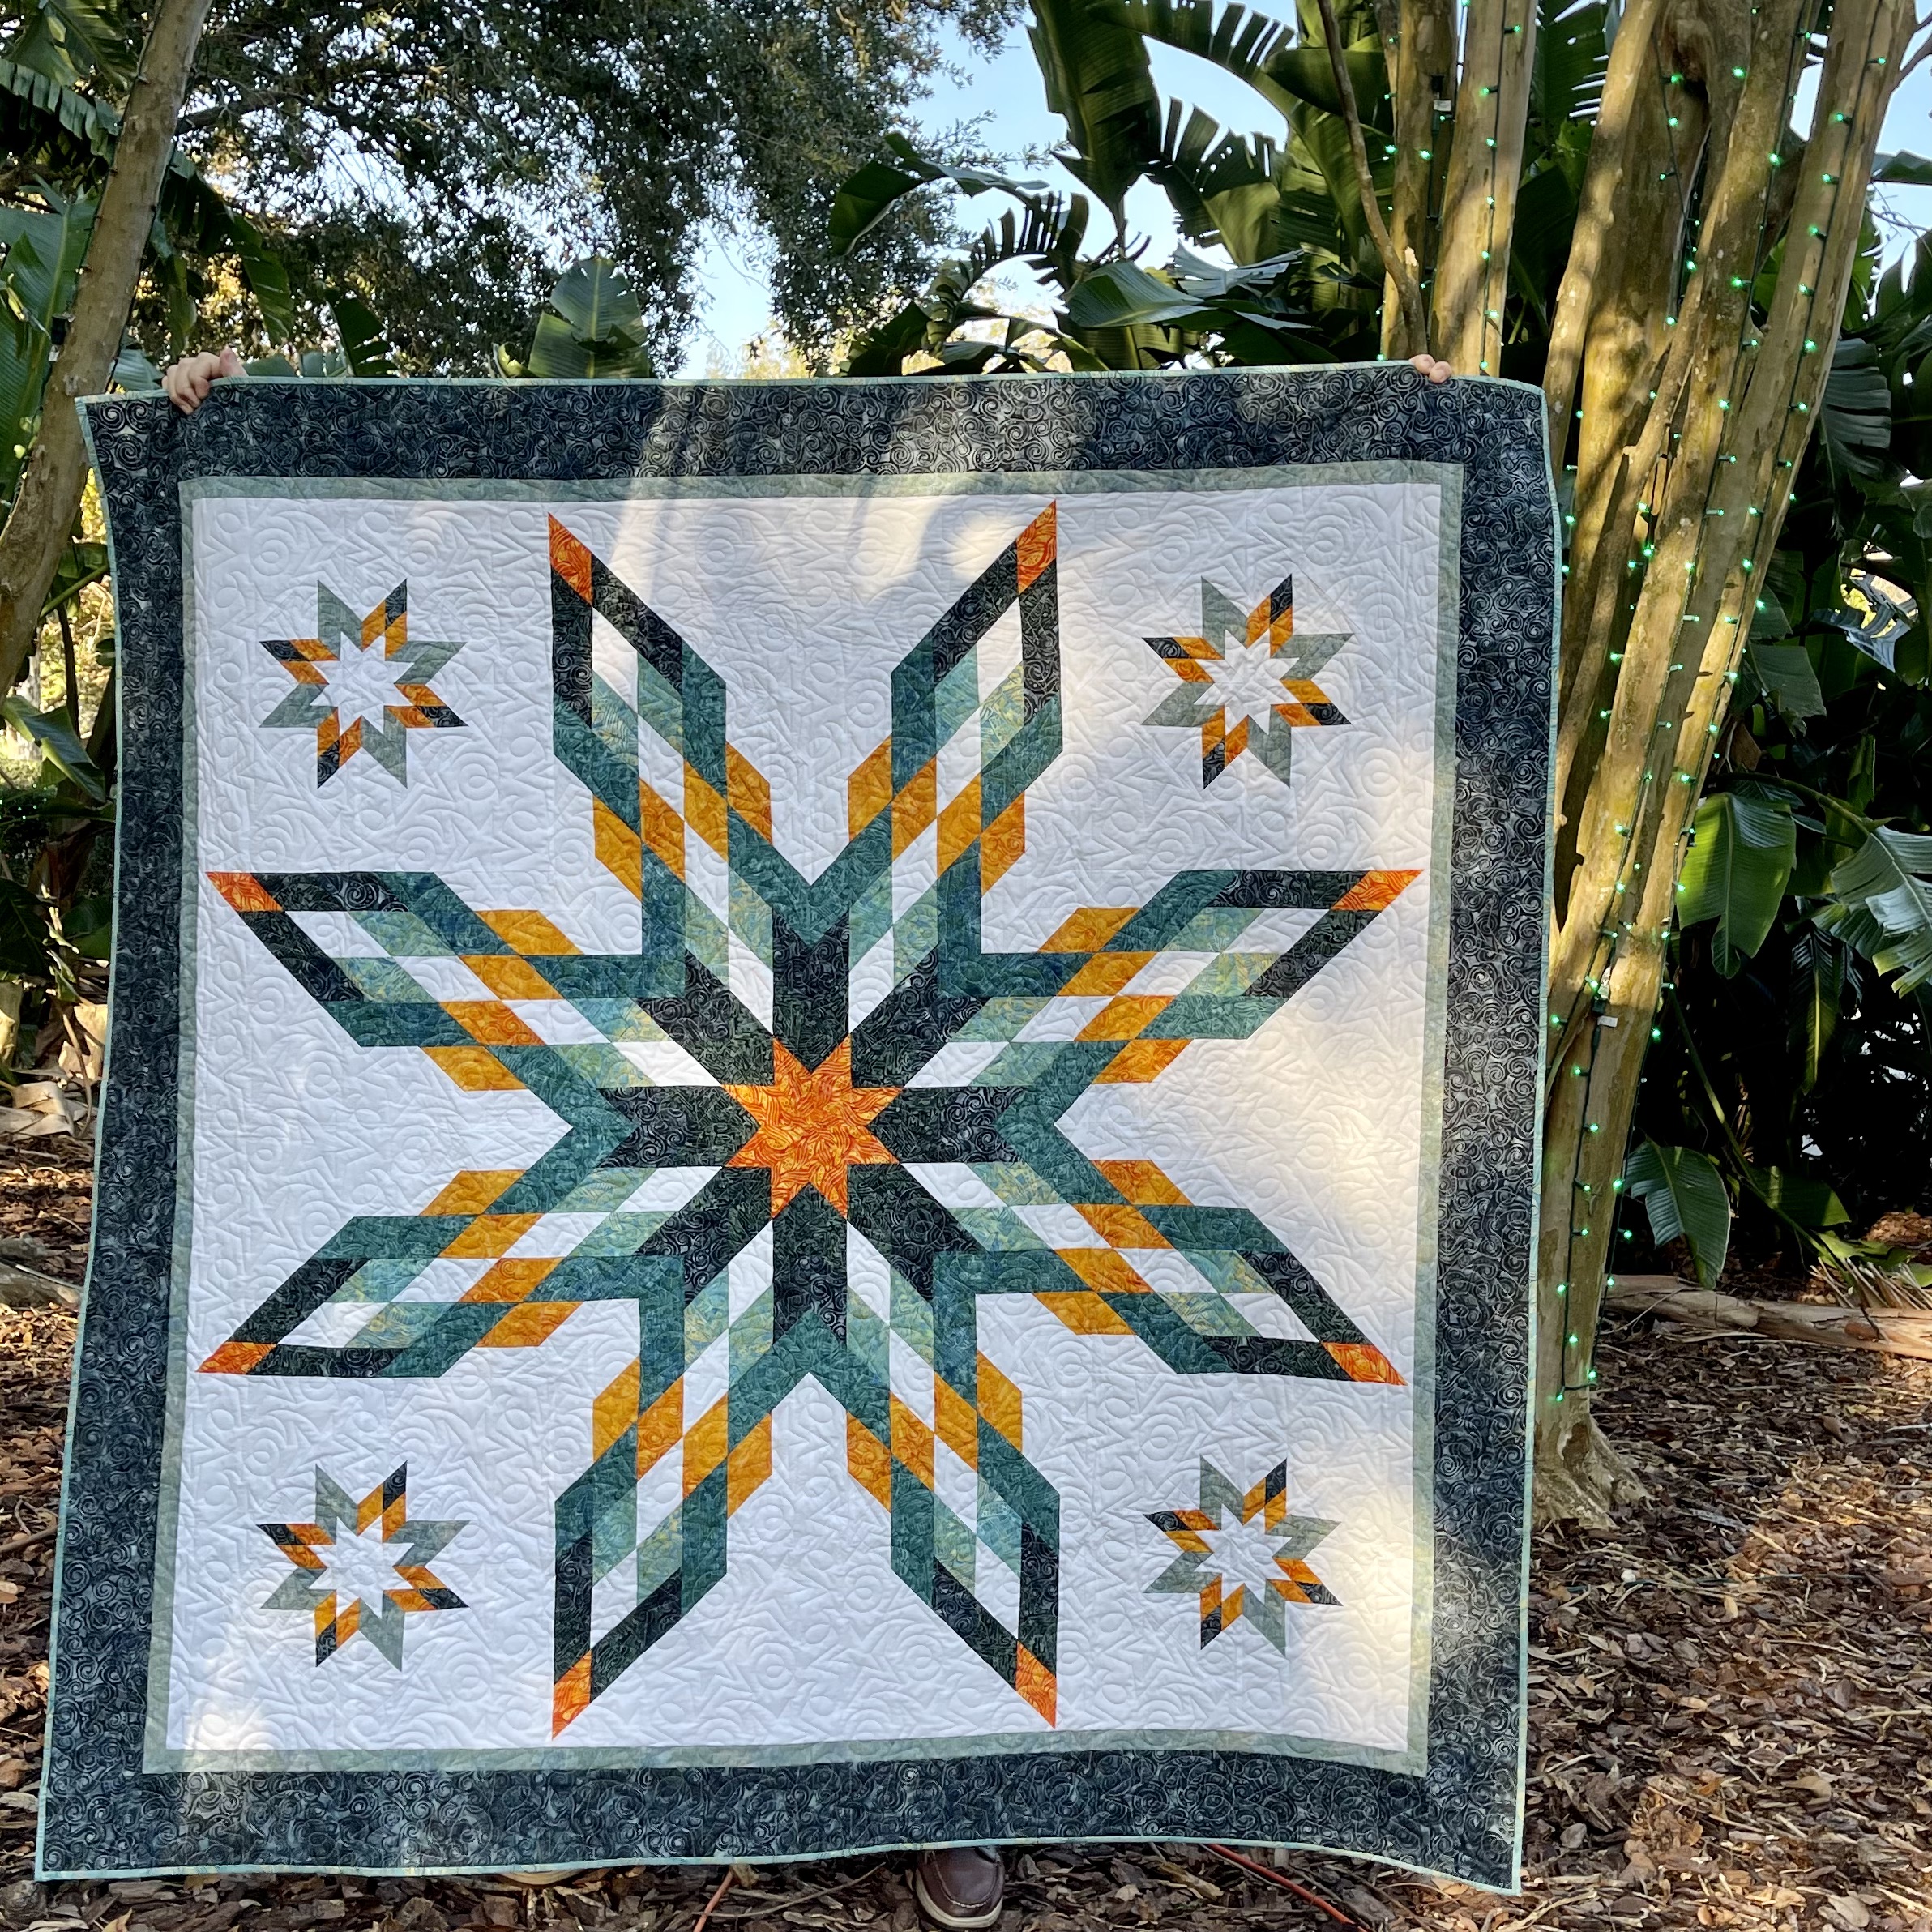 Top 10 Quilting Gifts for Quilters - Kate Colleran Designs